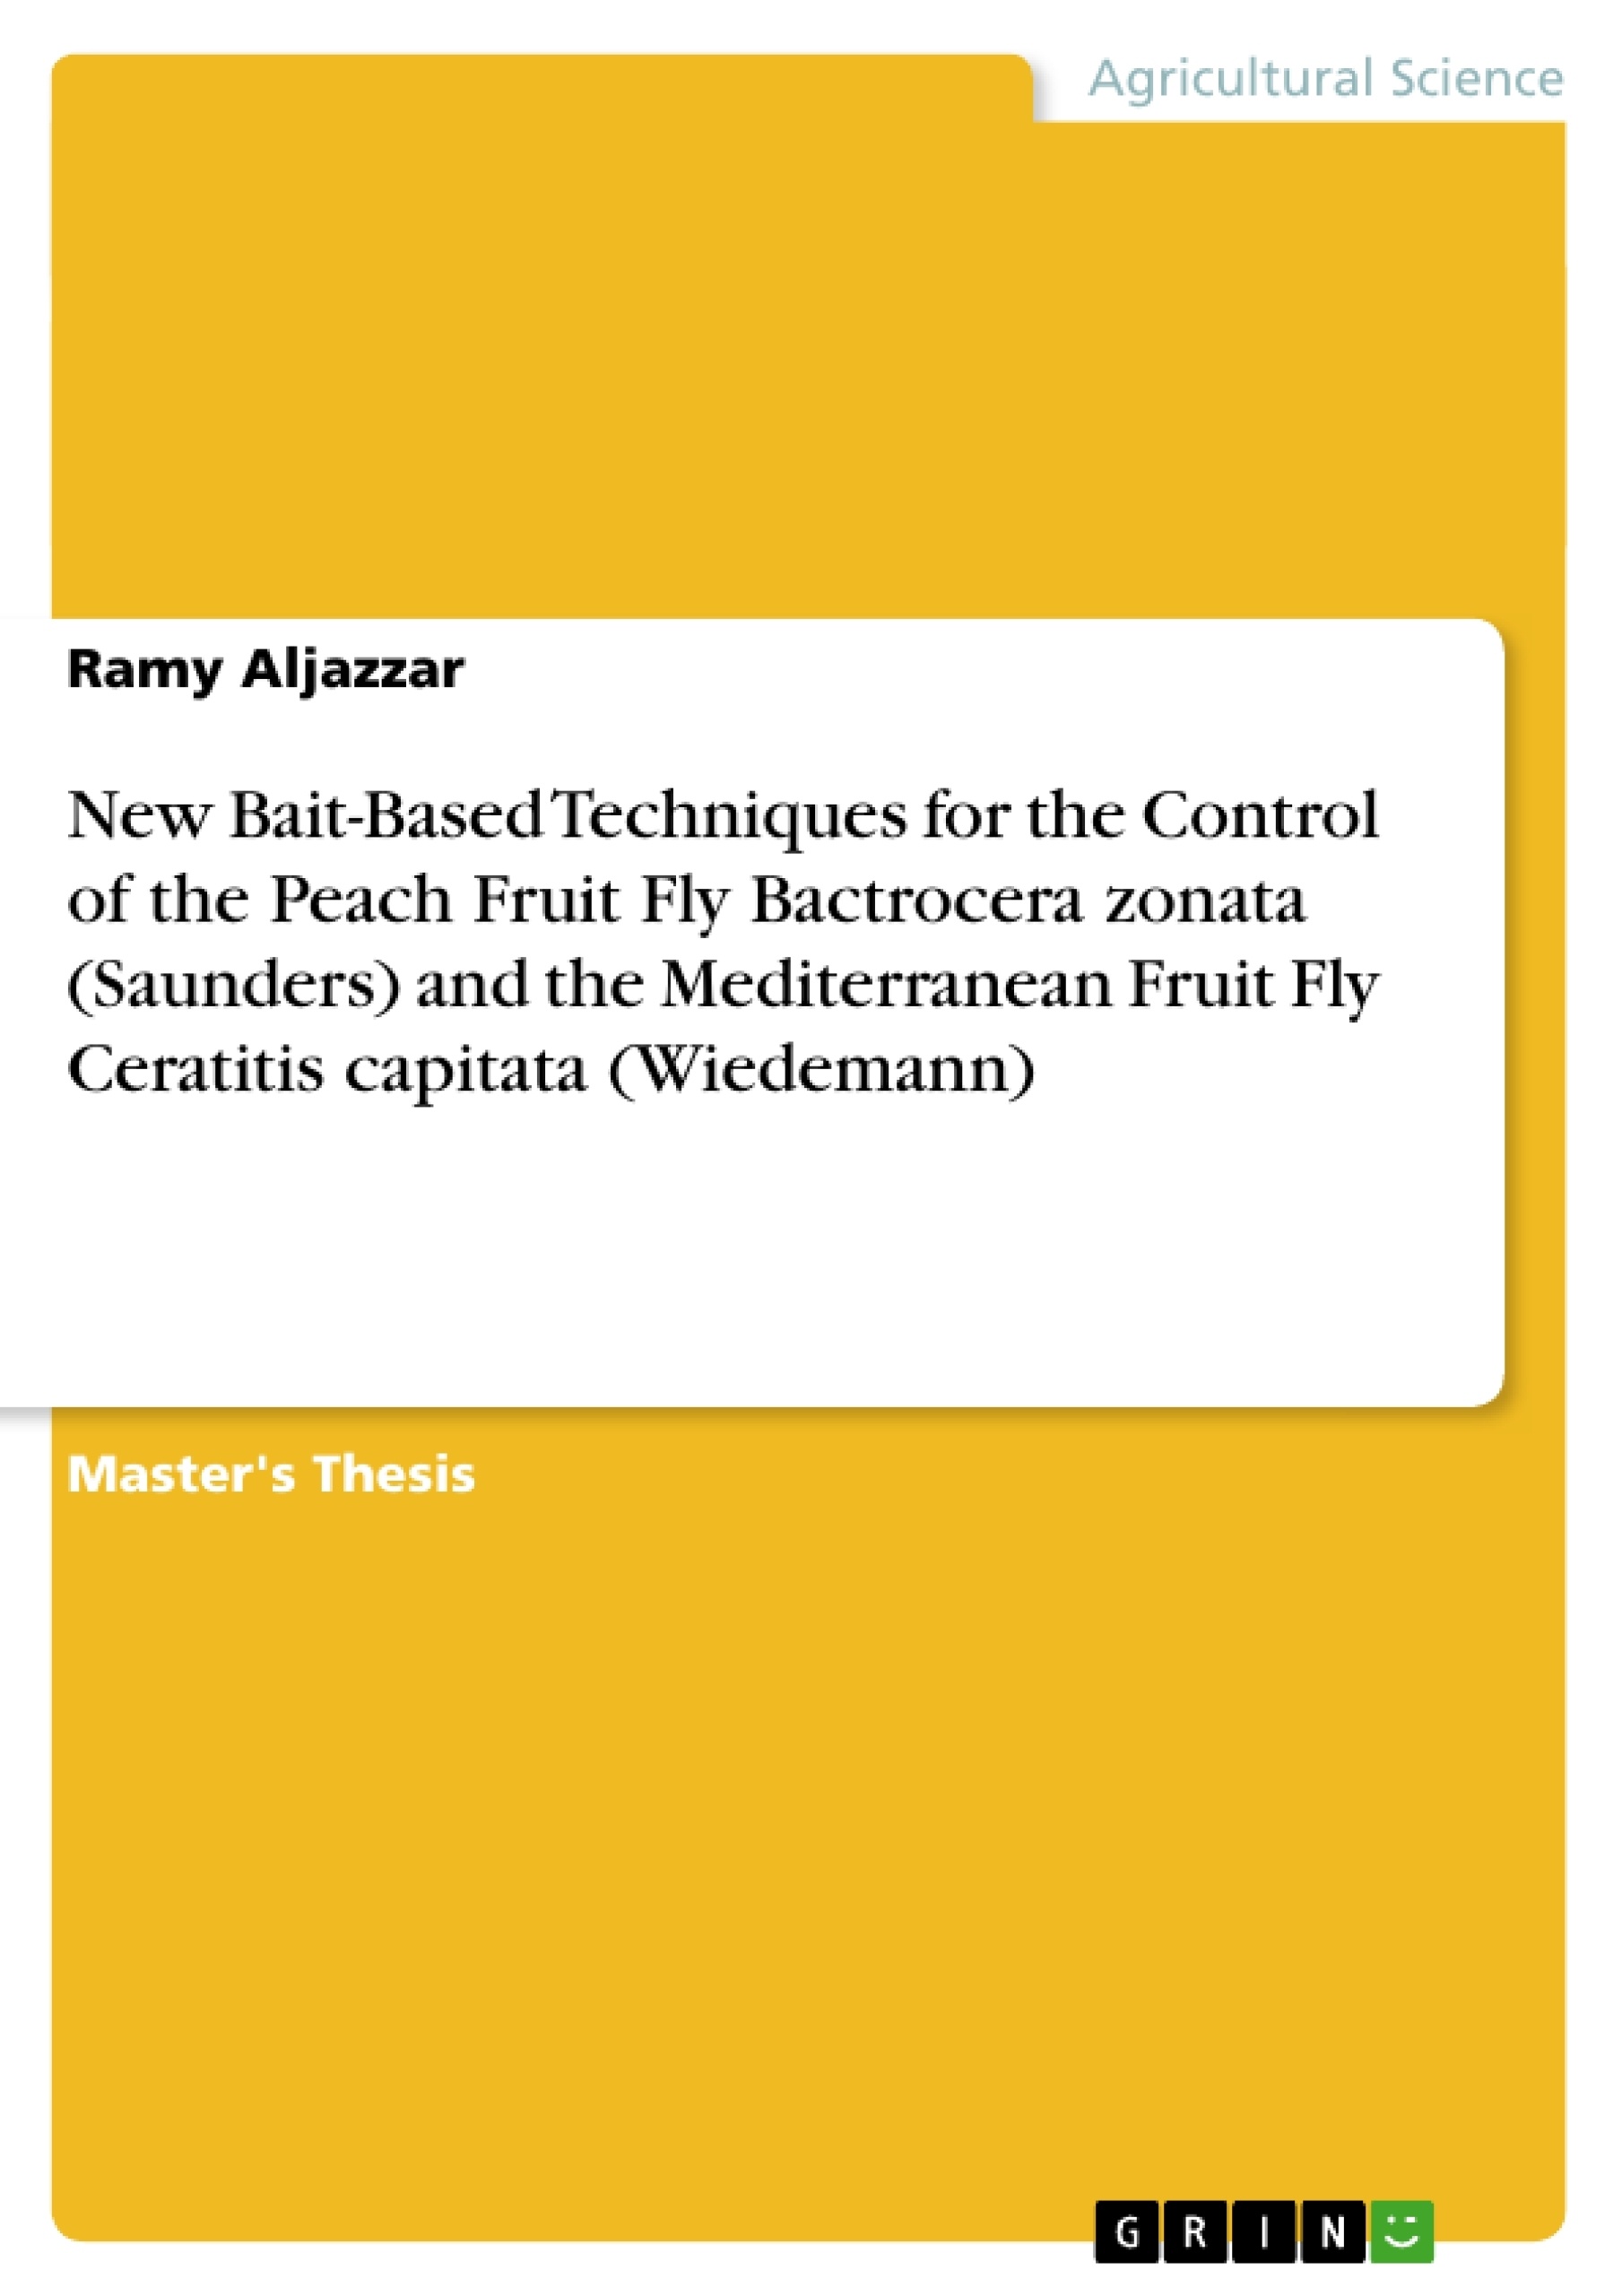 Título: New Bait-Based Techniques for the Control of the Peach Fruit Fly Bactrocera zonata (Saunders) and the Mediterranean Fruit Fly Ceratitis capitata (Wiedemann)